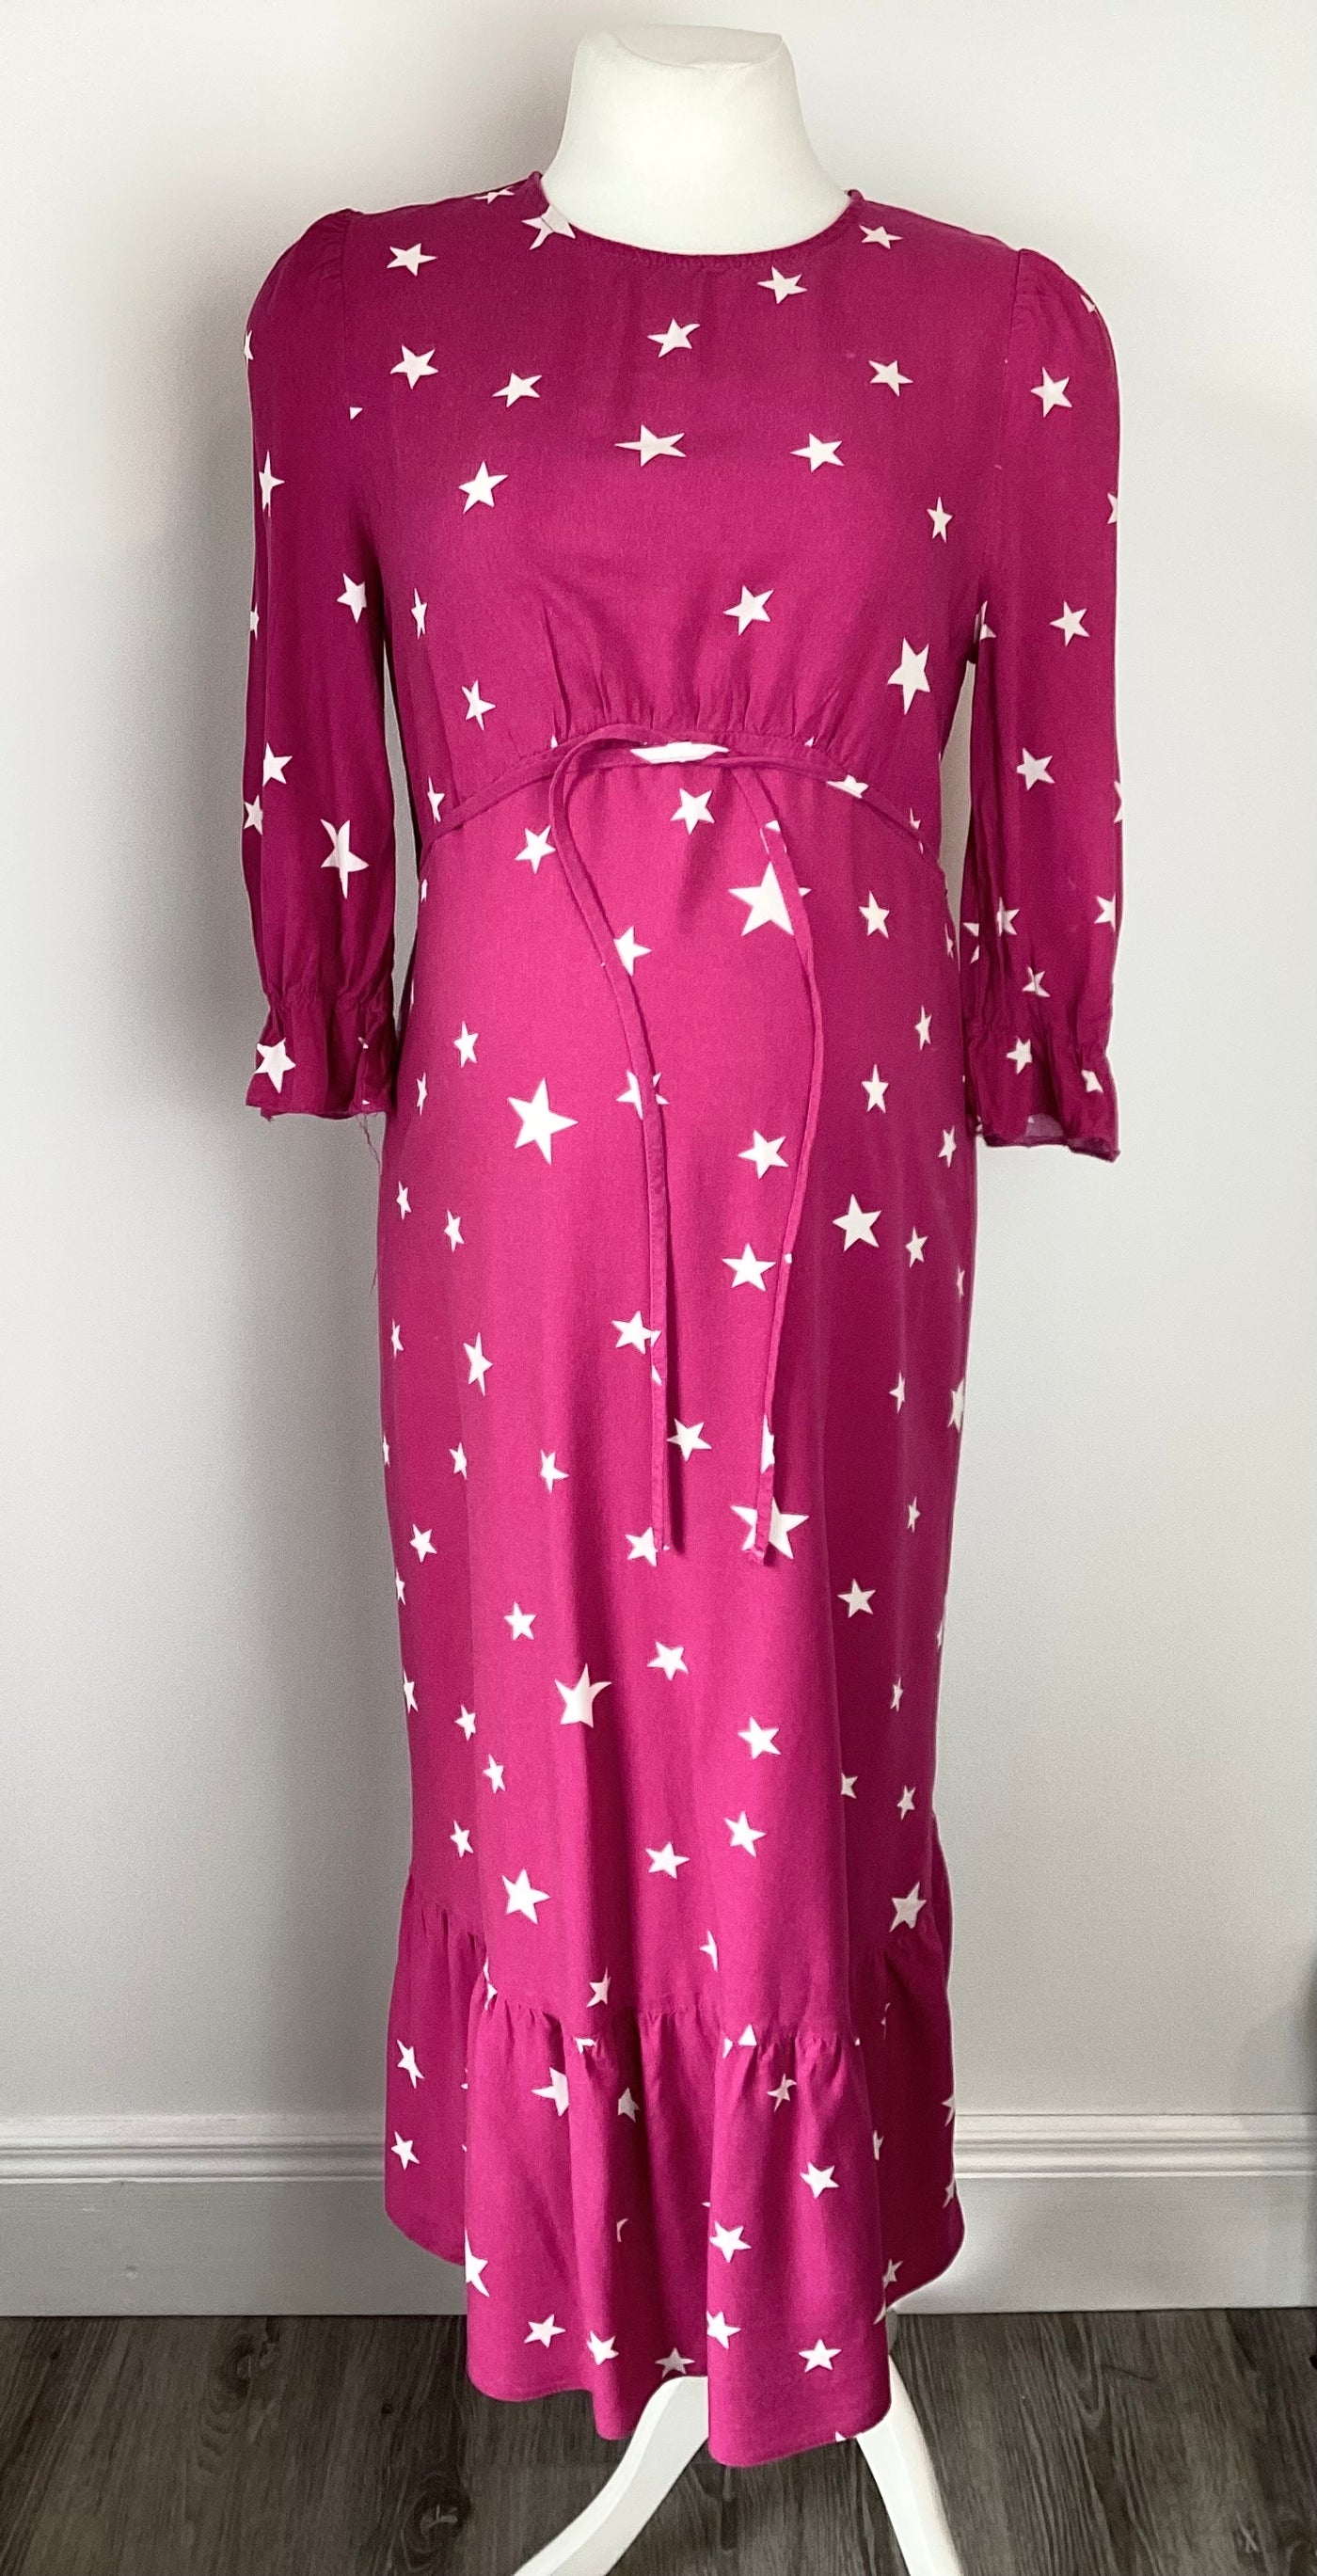 Nobody's Child Maternity cerise pink and white star print dress with waist tie - Size 10